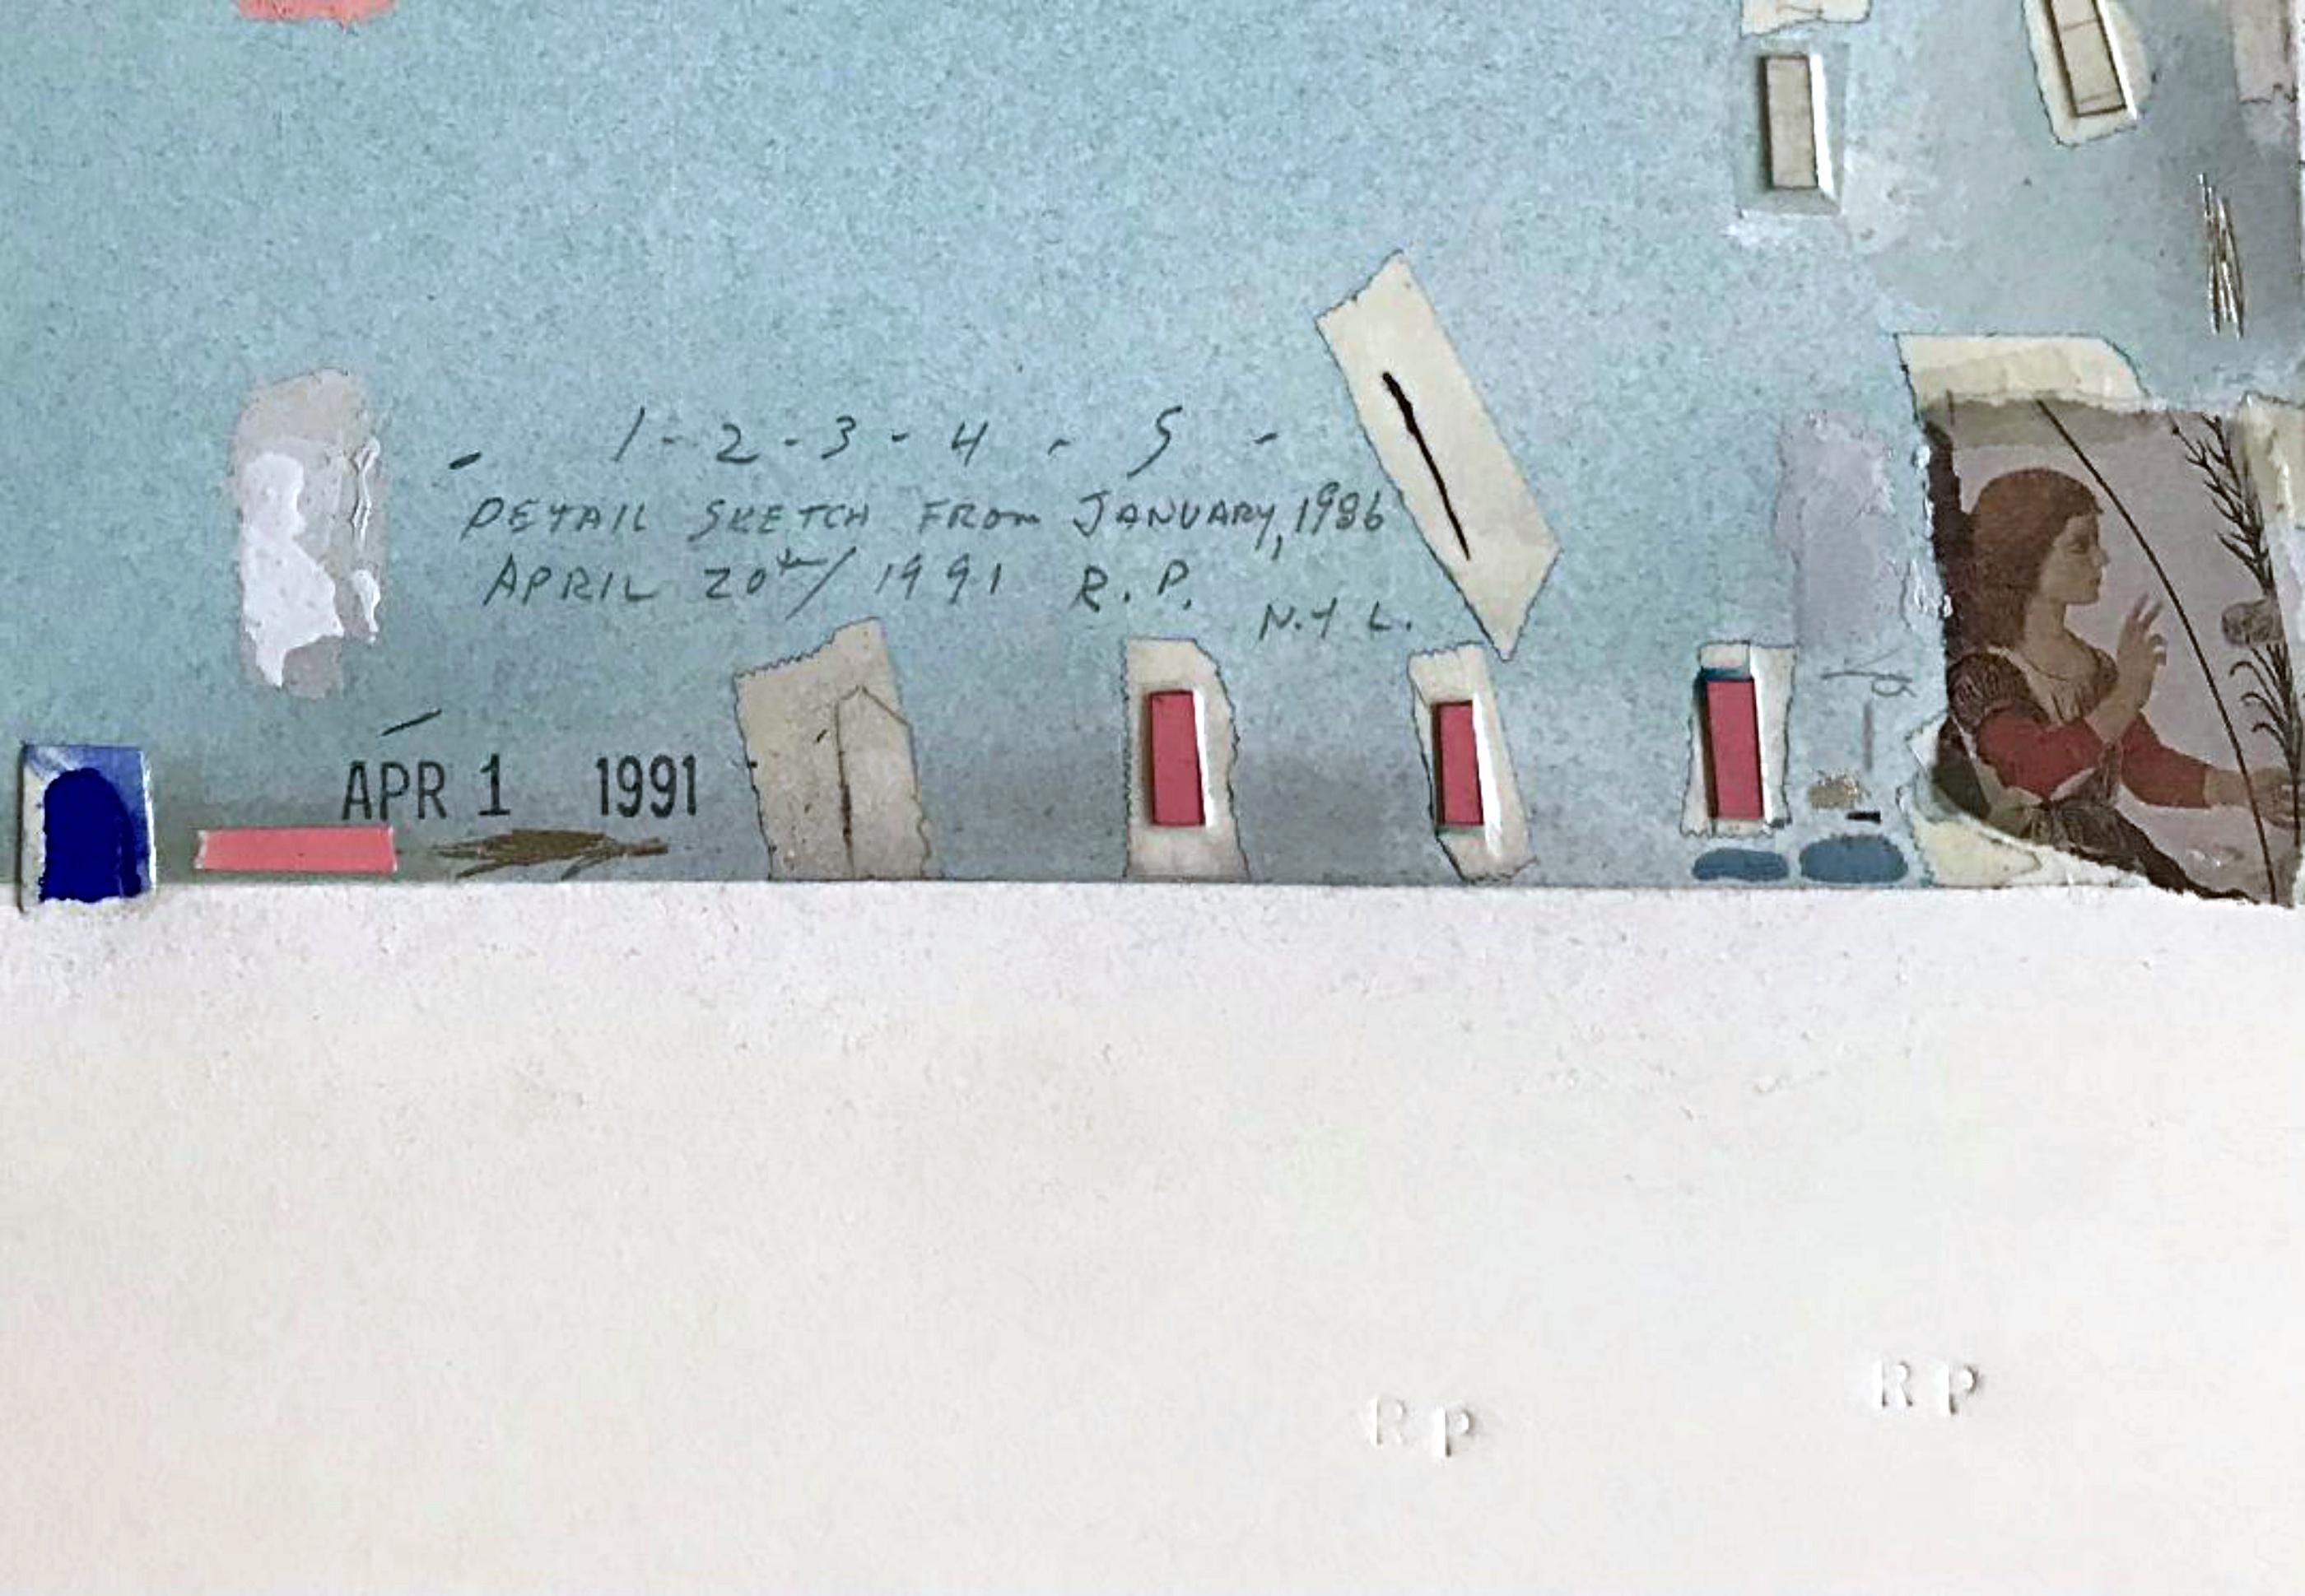 Detail Sketch from January 1986, Pure pigment collage, acrylic painting; Signed For Sale 1